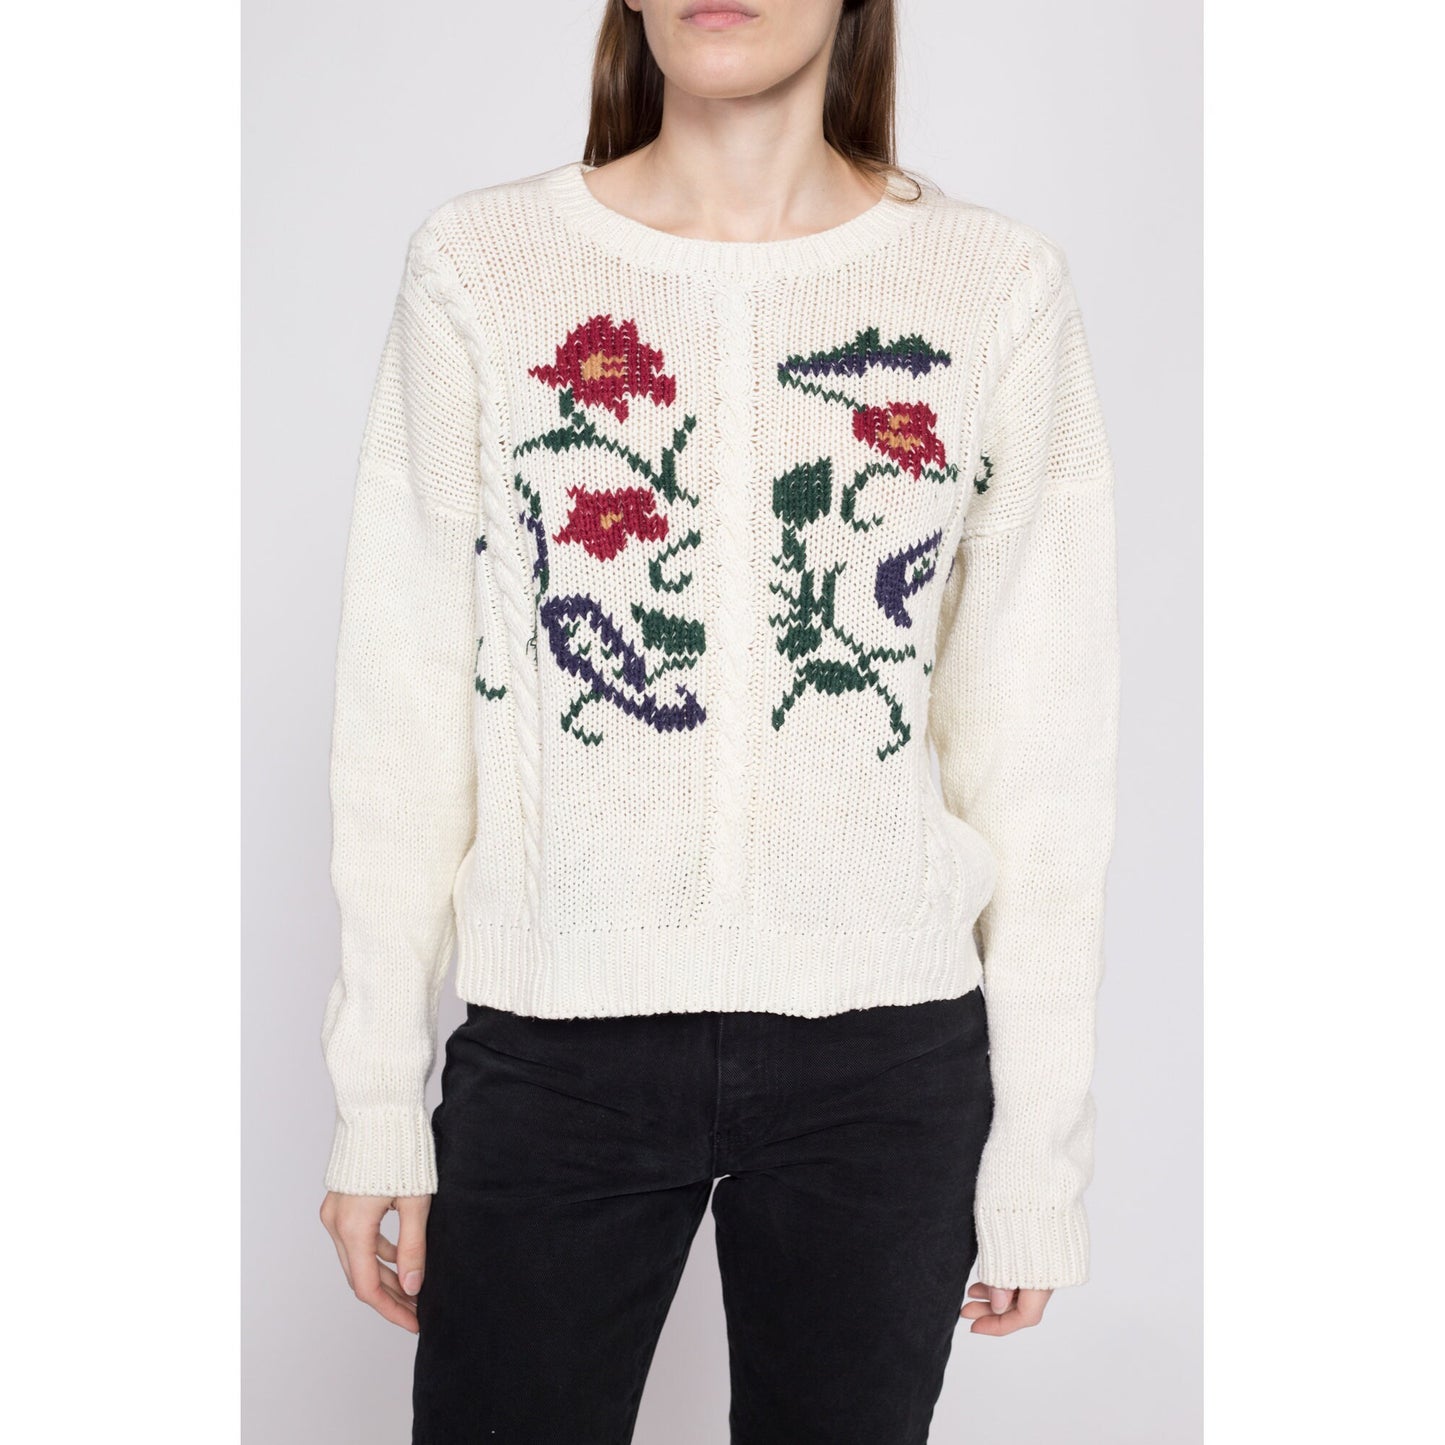 90s White Floral Cable Knit Sweater - Medium | Vintage Slouchy Knit Cotton Ramie Pullover Jumper